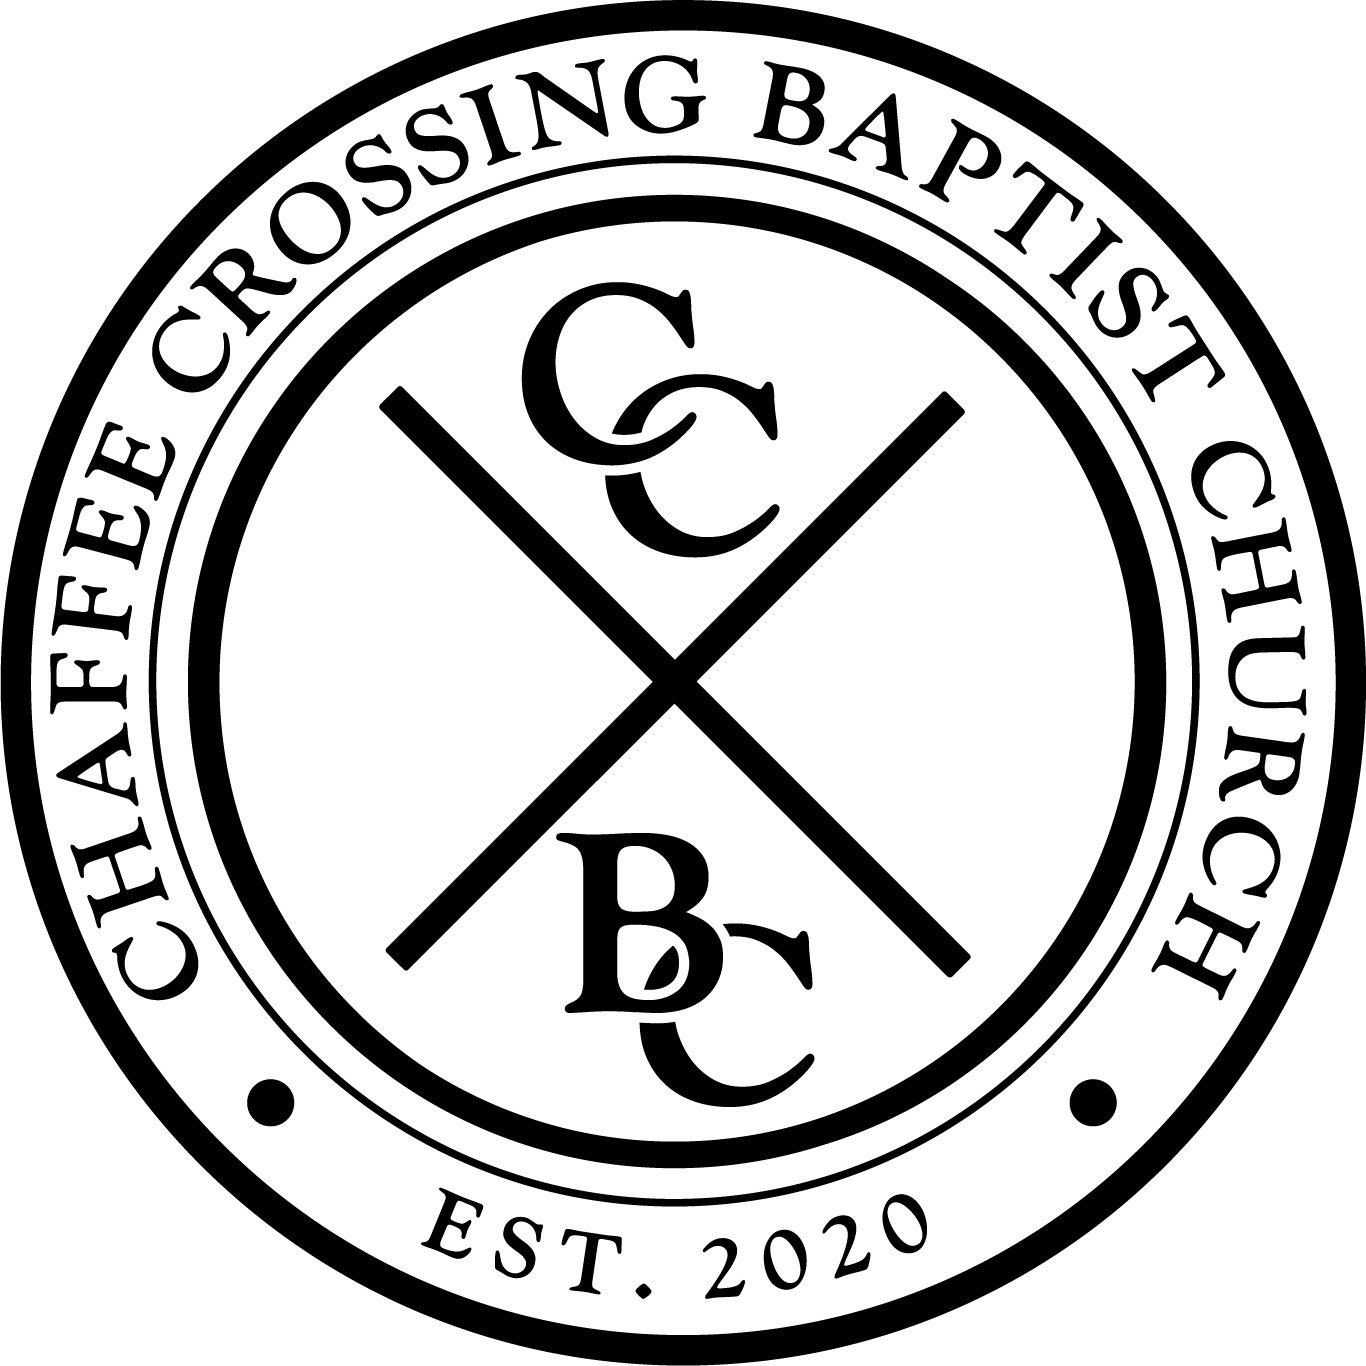 The Great Commission & CCBC